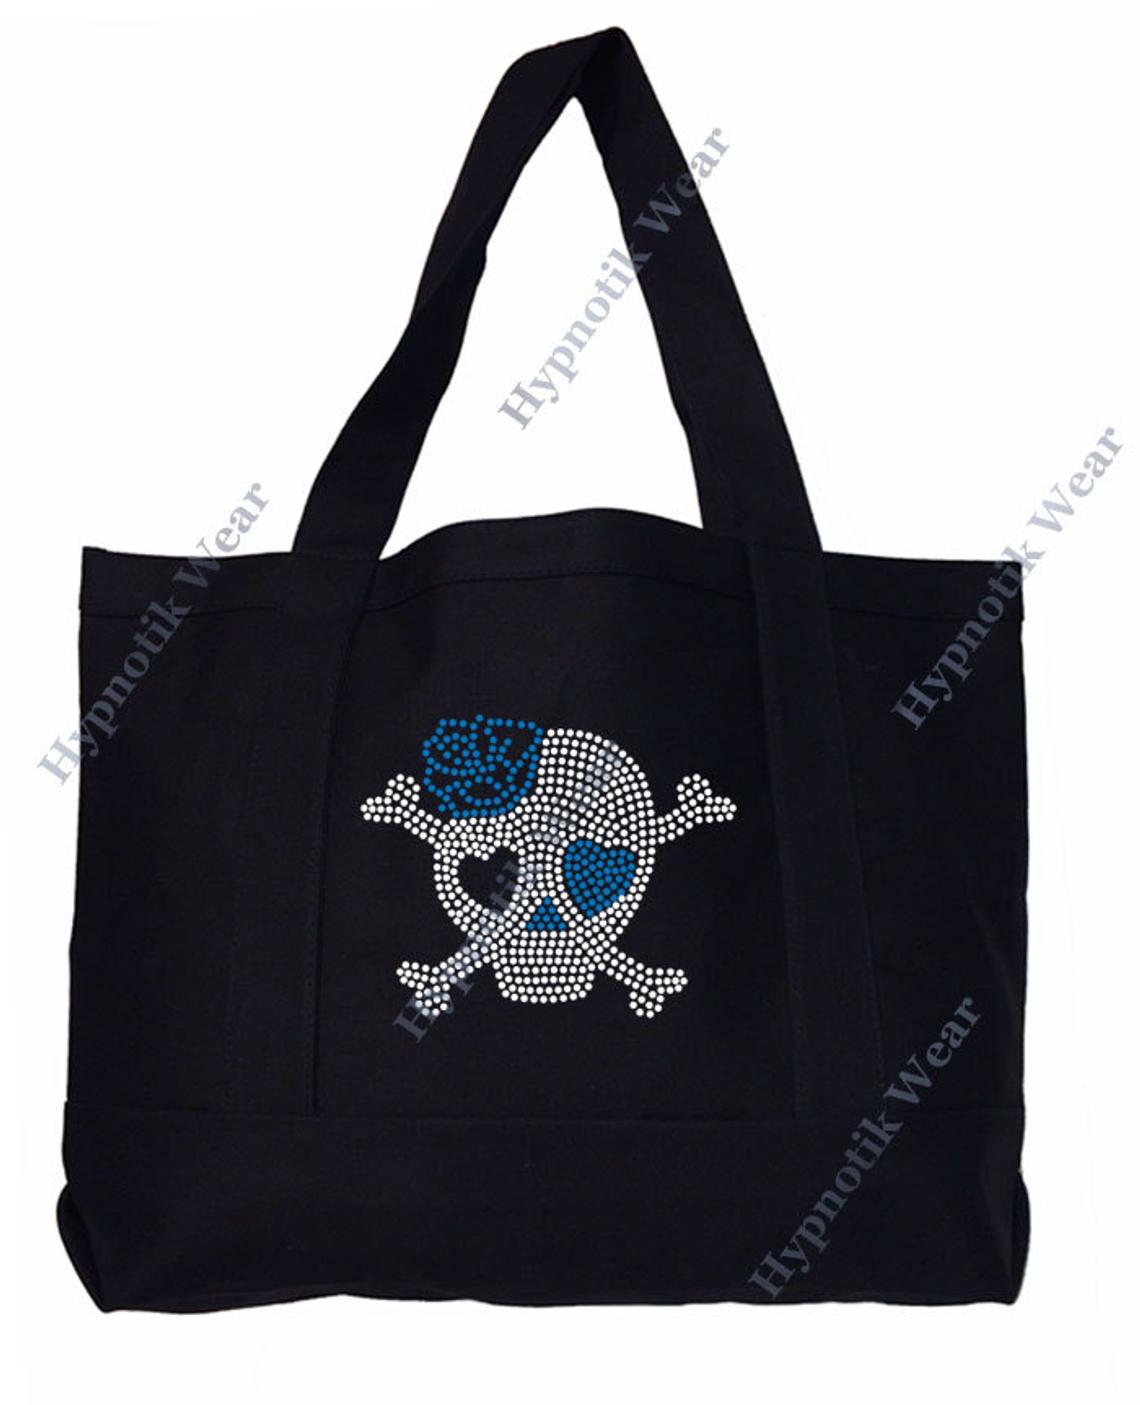 Rhinestone Sturdy Tote Bag with Zipper & Front Pocket " Skull with Rose " in Various Color, Bling